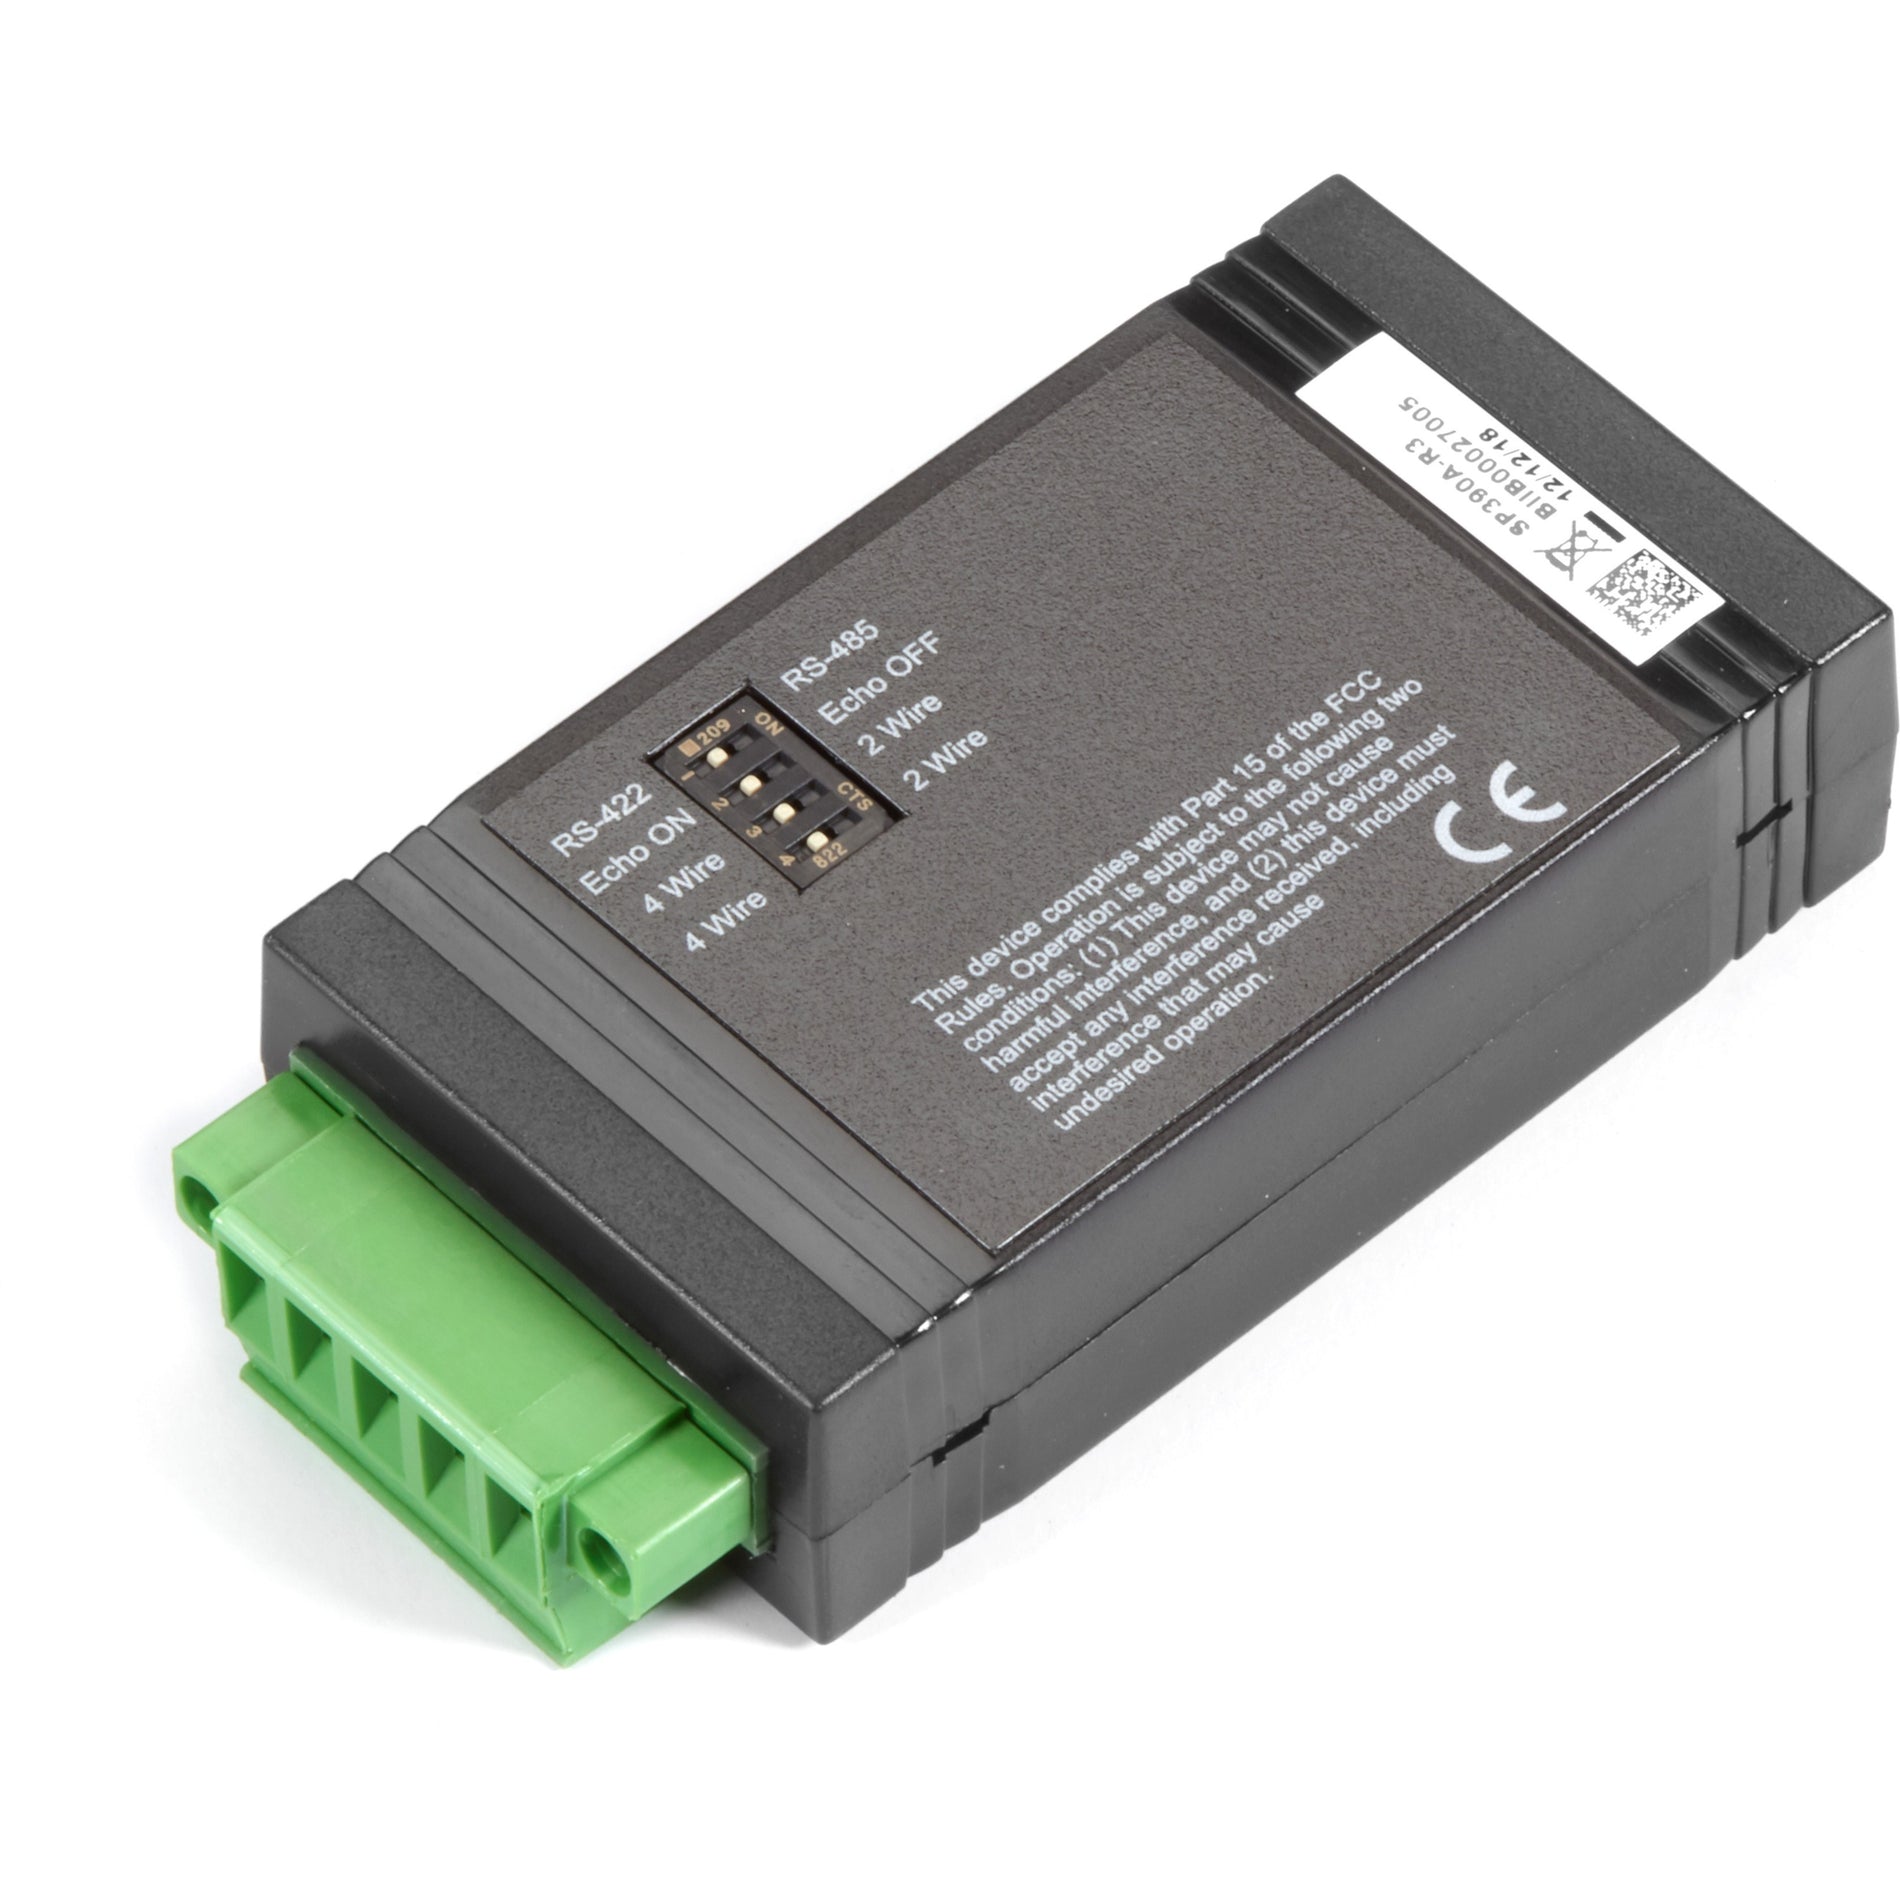 Black Box SP390A-R3 USB to RS422/485 Converter with Opto-Isolation, 2 Ports, 5 Year Warranty